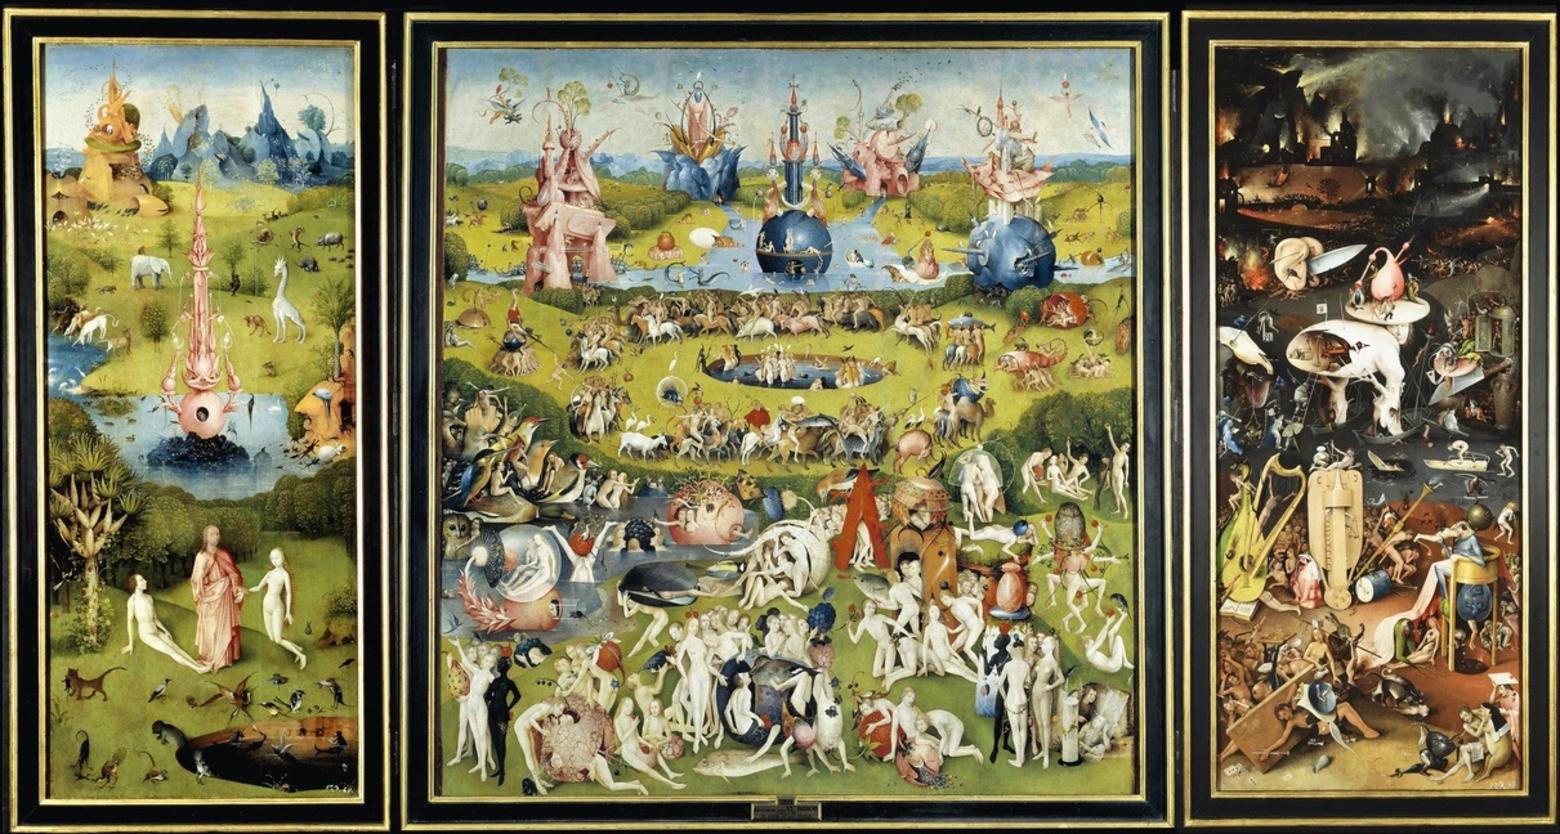 Bosch's 'Garden of Earthly Delights,' the full triptych as it appears at the Prado